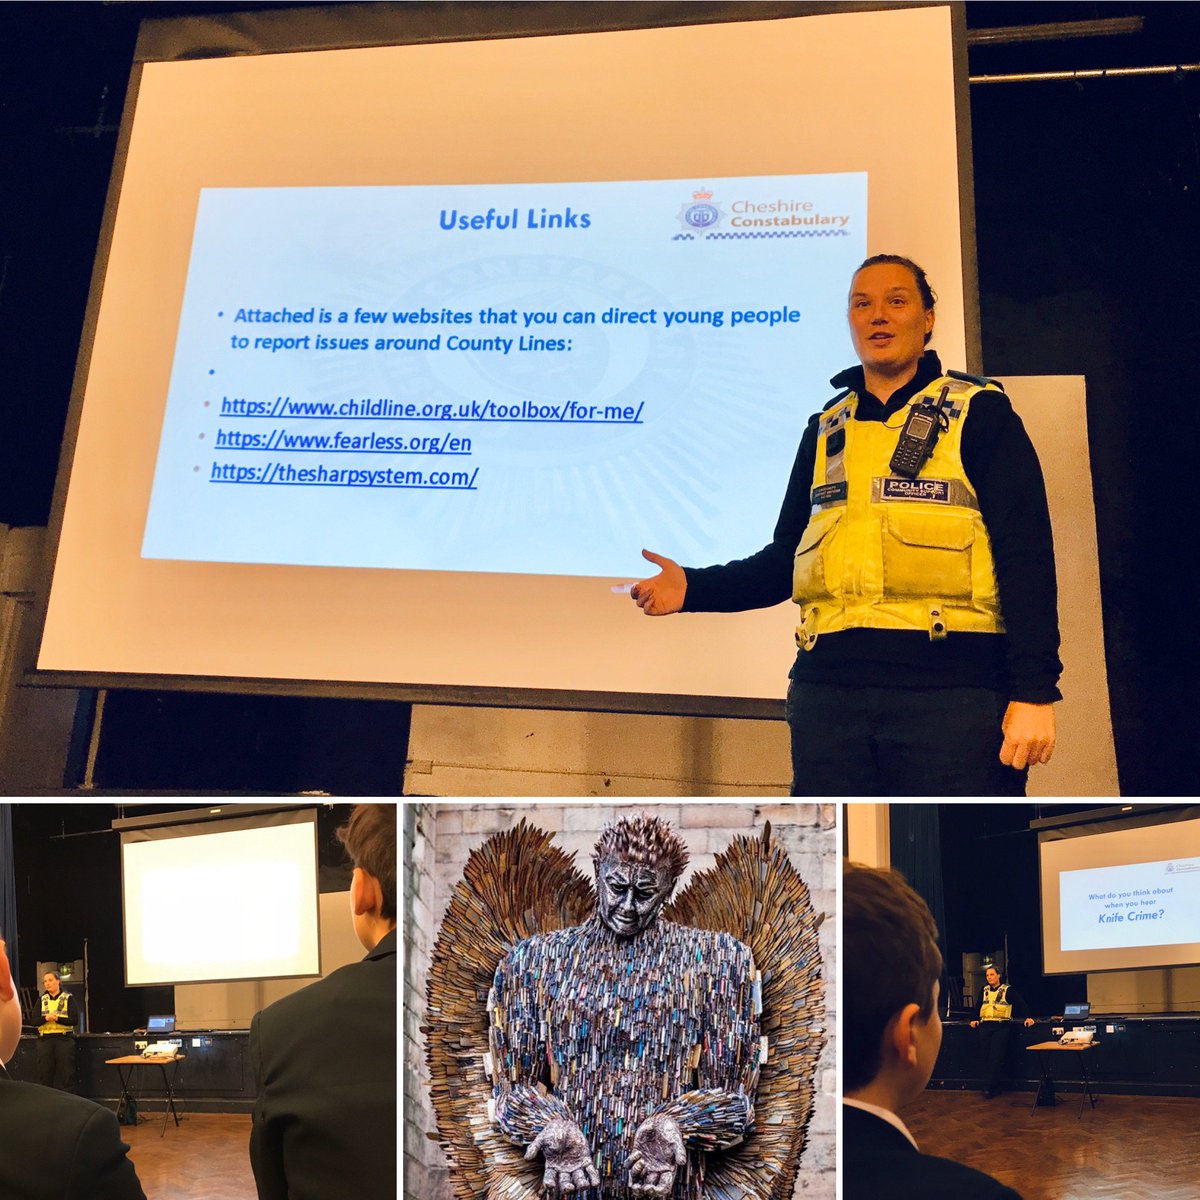 99% of young people aged 10-29 do not carry knives. Many thanks to PCSO Lauren Davies @HandbridgePkPol
for delivering a powerful message about #knifecrime in our assemblies this week #OperationSceptre
#safety #community #countylines #childline #dontbeavictim #lookoutforeachother